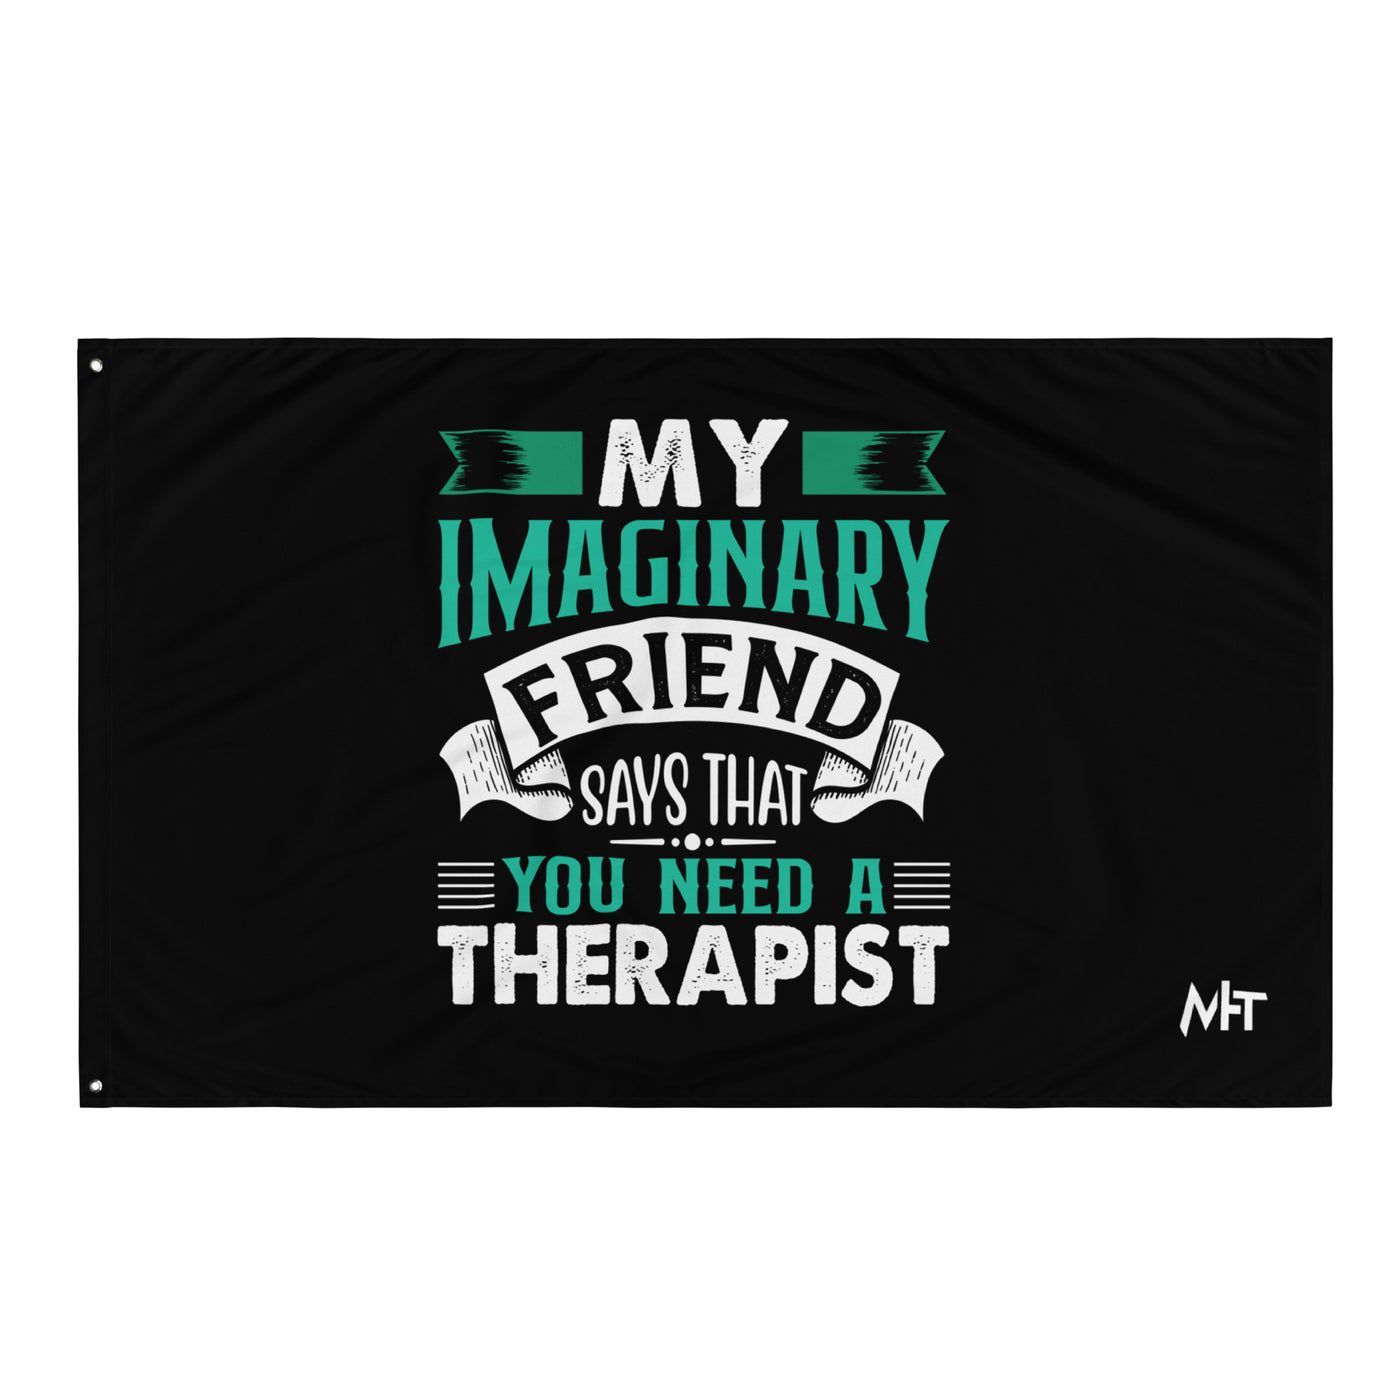 My imaginary friend Says you Need a therapist - Flag